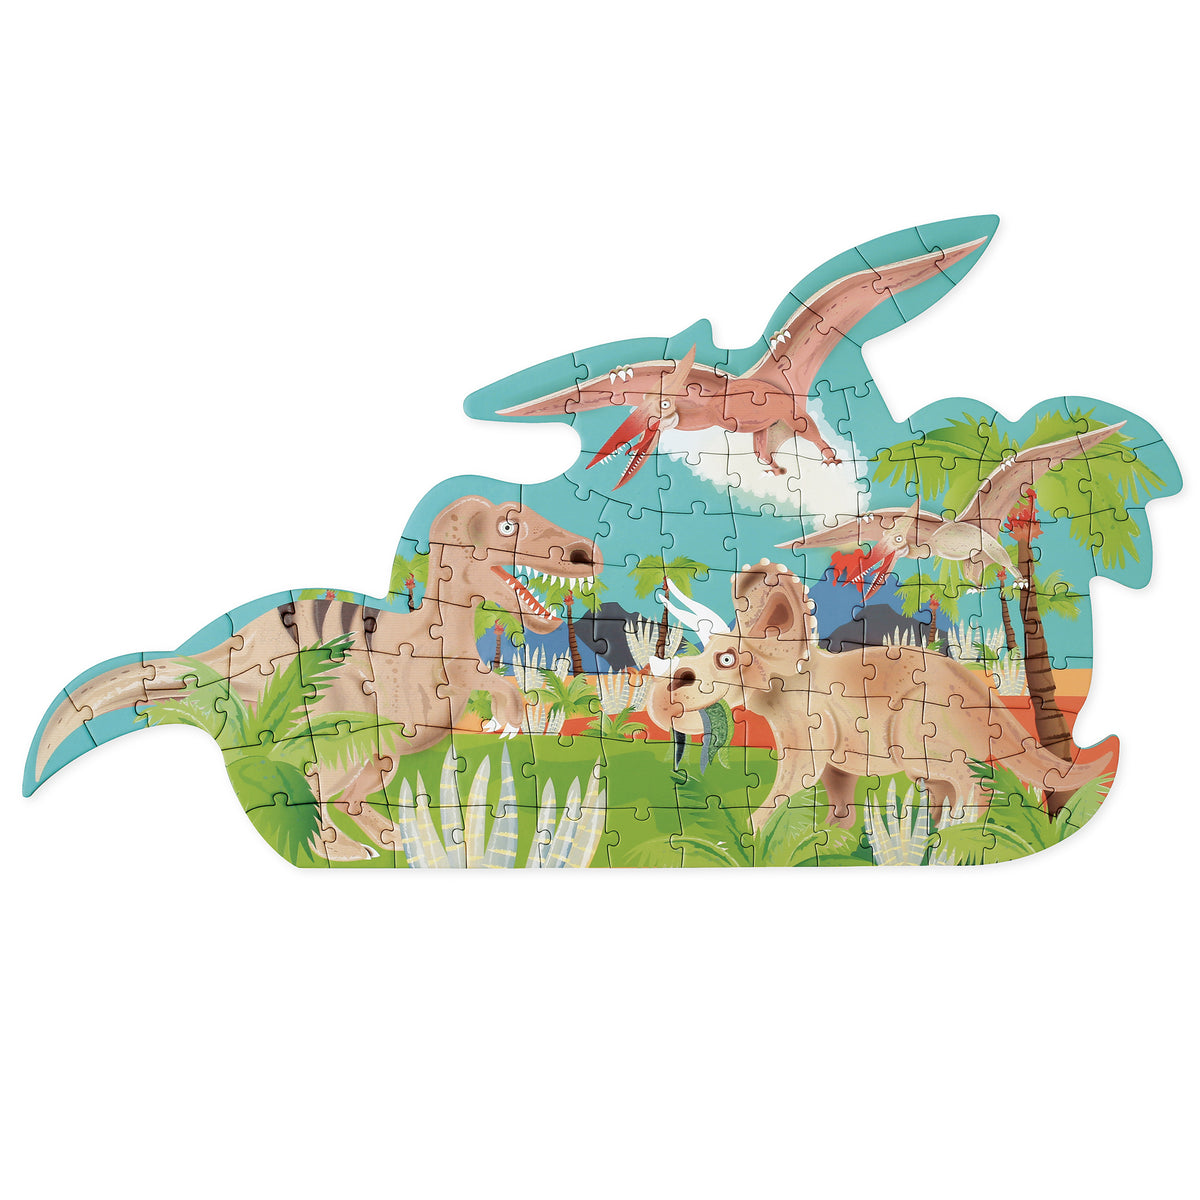 Dinosaur Double Layer Wooden Puzzle by andZee - 67 piece - 2 Puzzles in 1